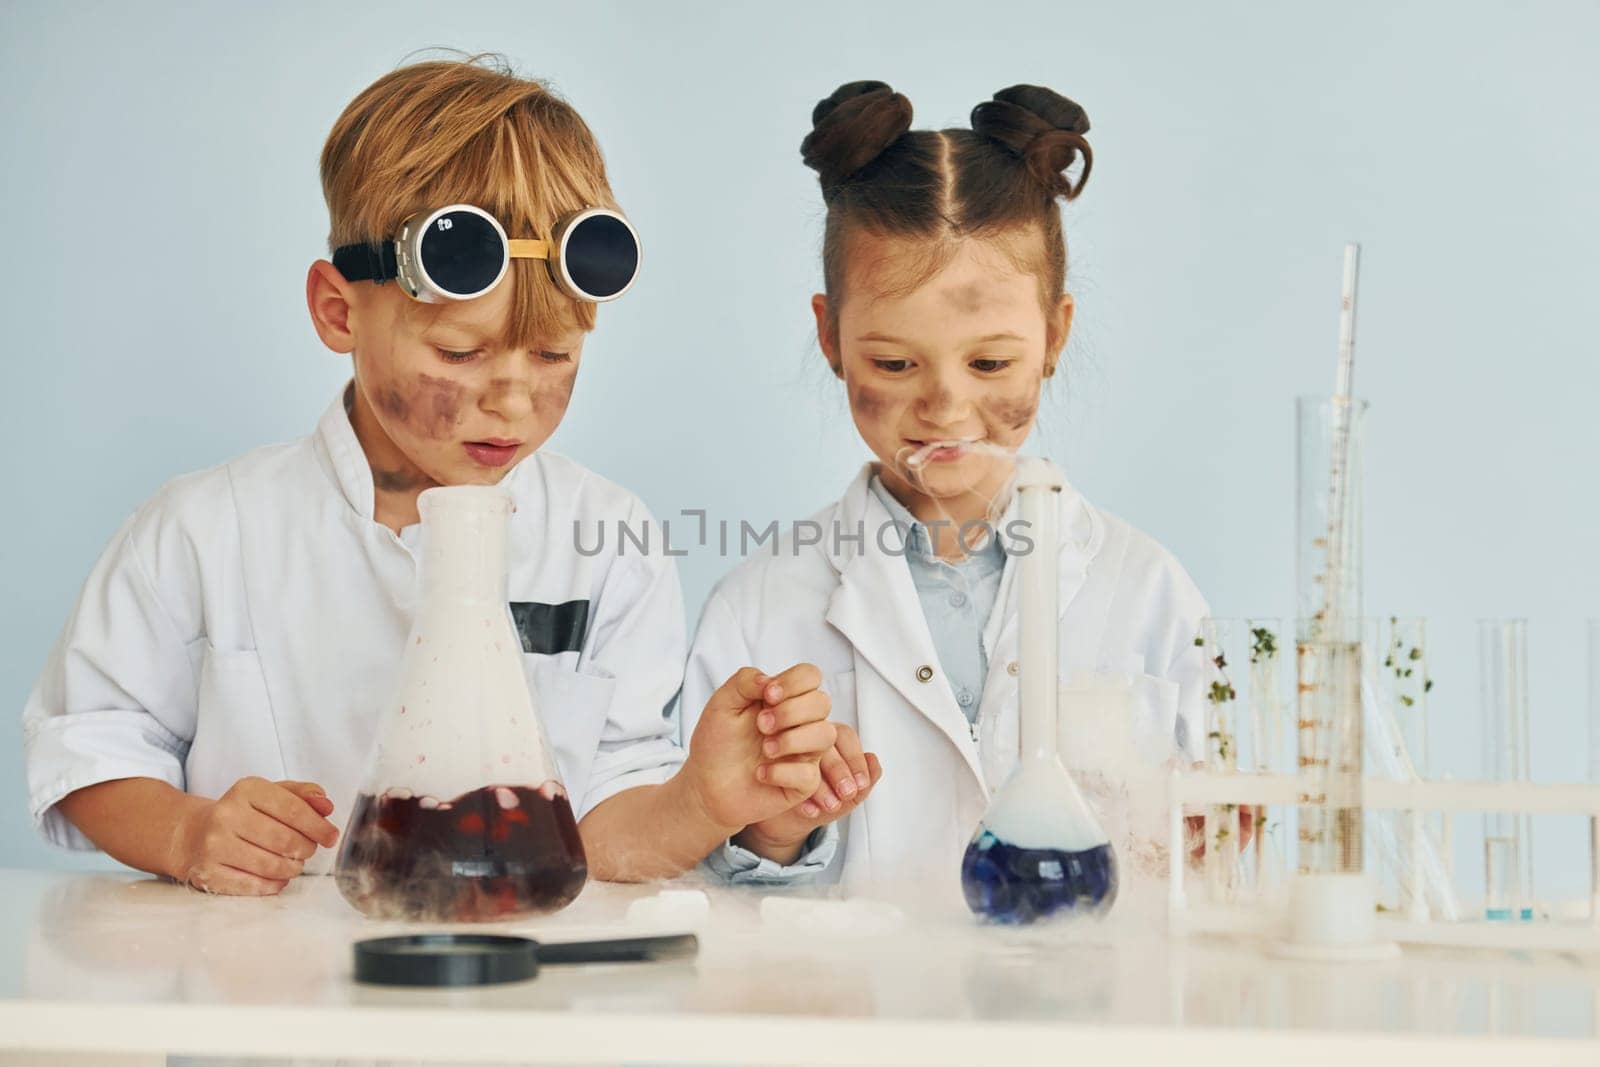 Boy works with liquid in test tubes. Children in white coats plays a scientists in lab by using equipment.